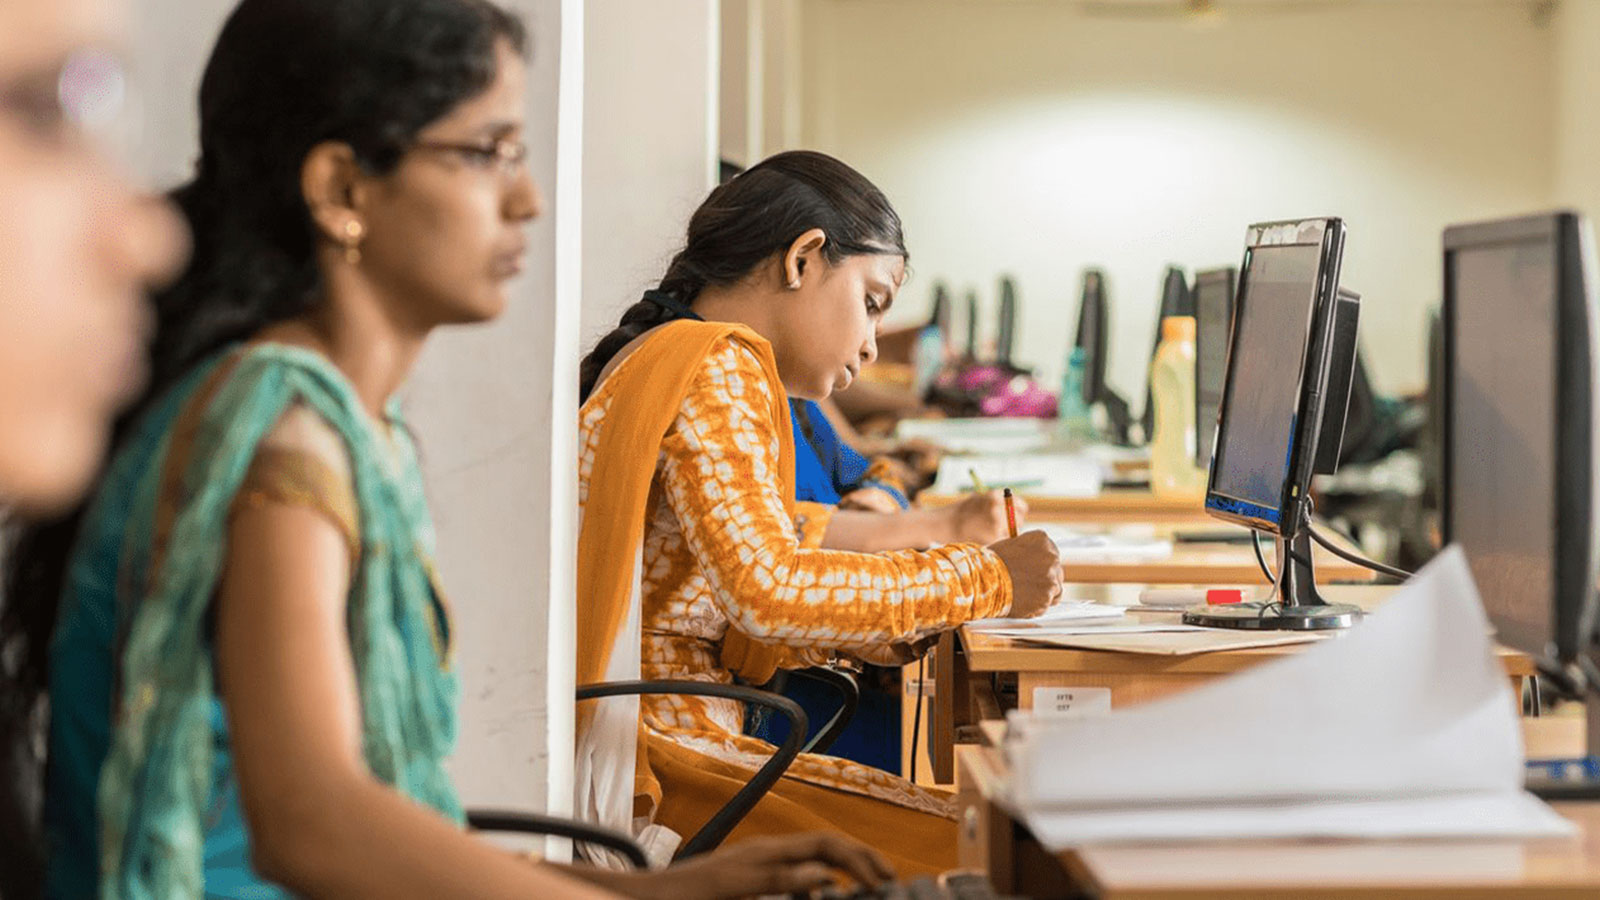 Women in India working in a computer lab